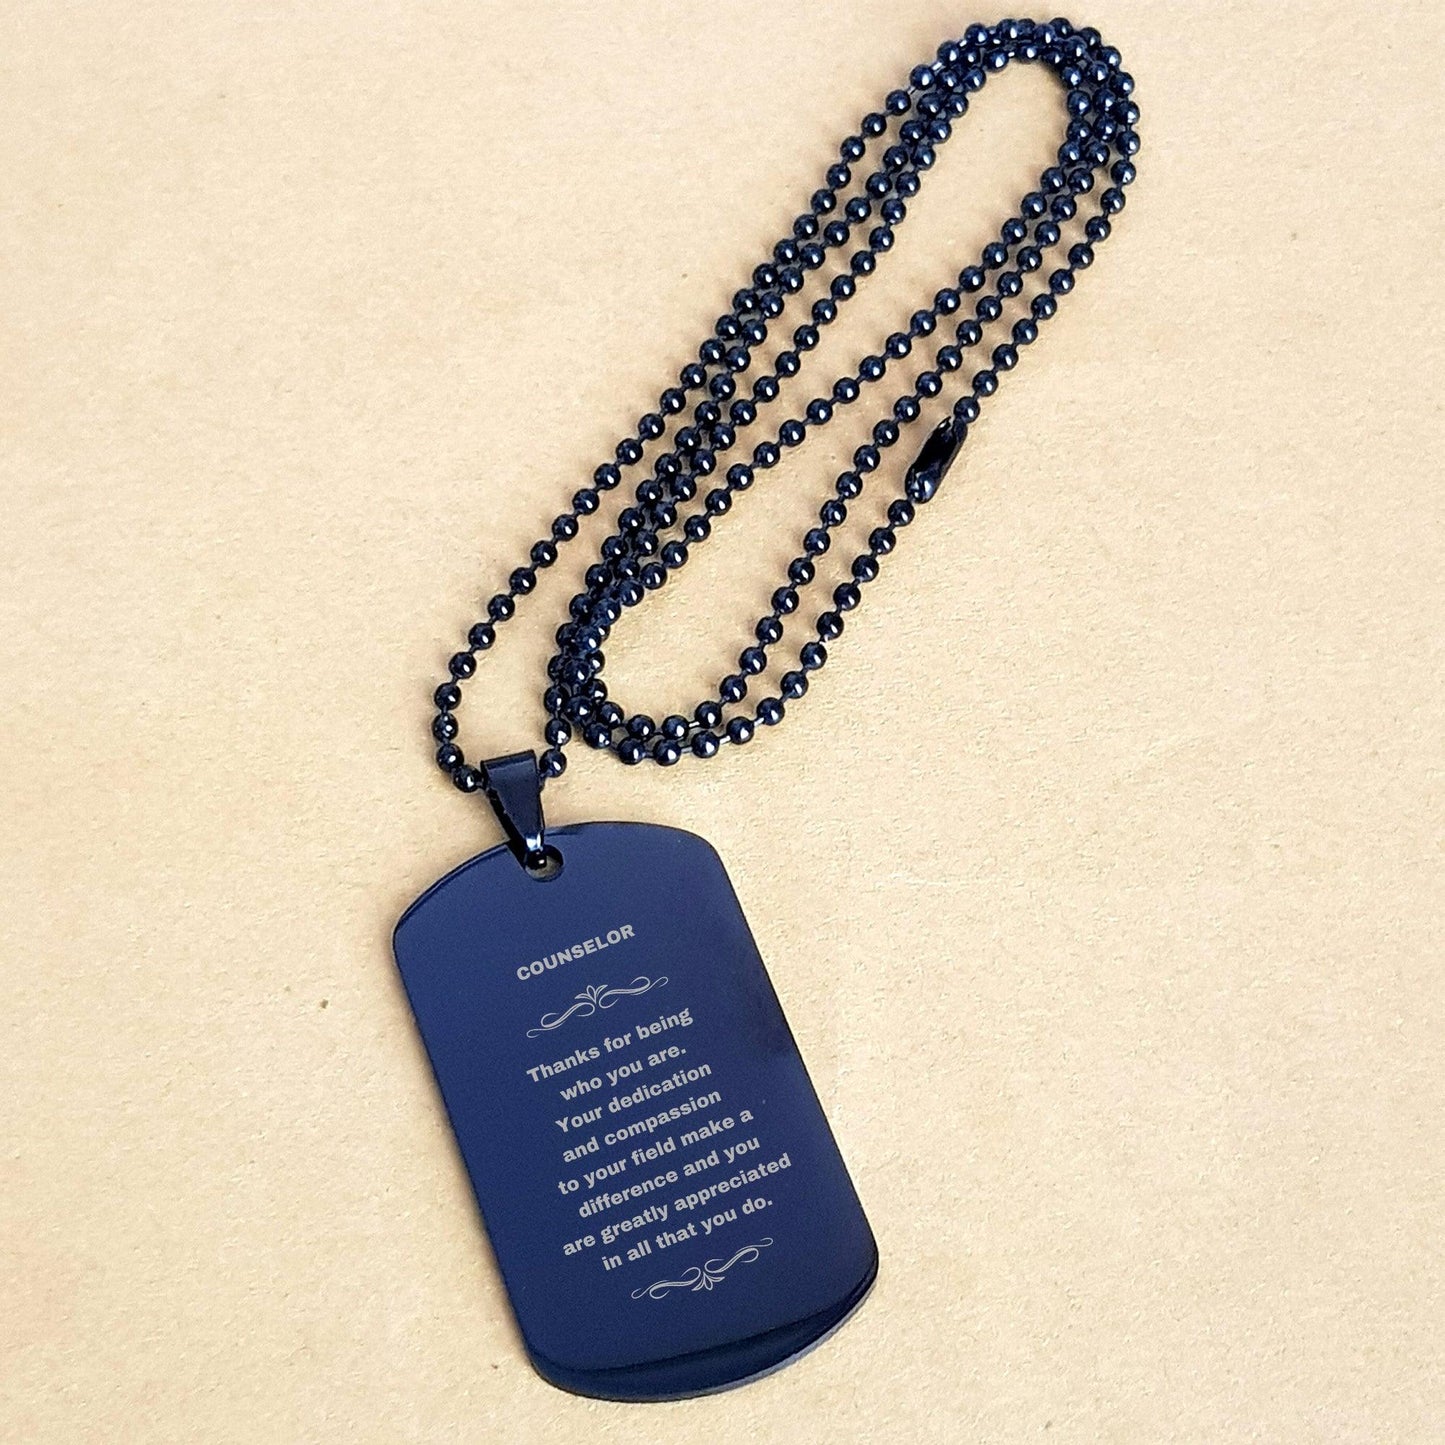 Motivational Brother-in-law Black Dog Tag, Brother In Law I can promise to love you for the rest of mine, Dog tag Necklace - Mallard Moon Gift Shop